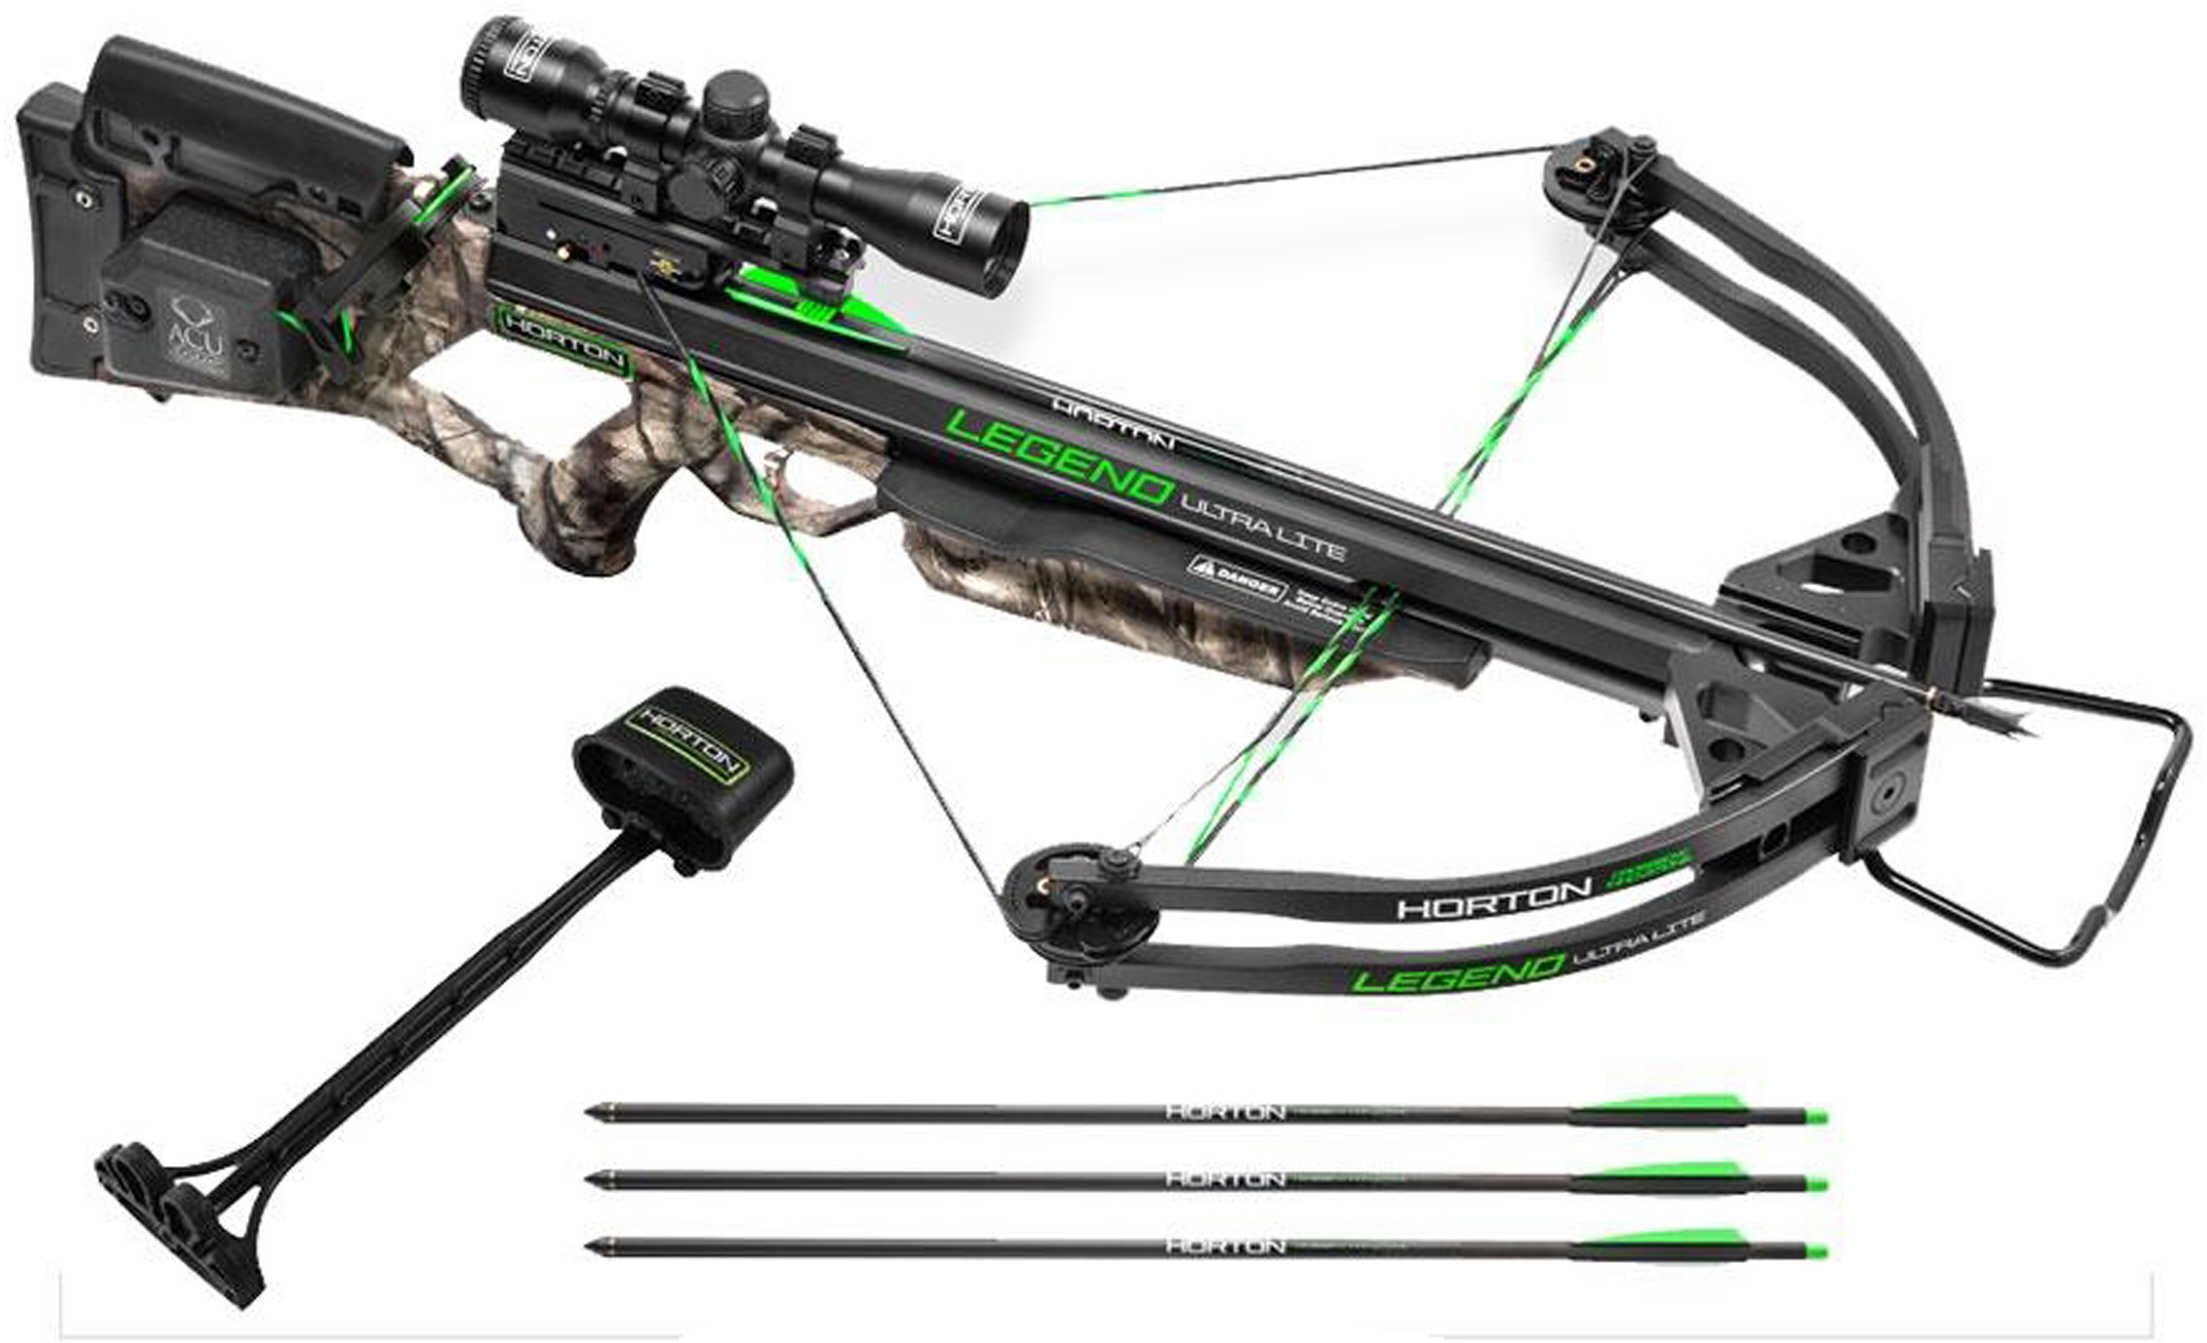 Horton Legend Ultra-Lite Package With 3x Pro Vioew Scope, Arrows/Quiver, ACudraw, Mossy Oak Md: NH15050-752